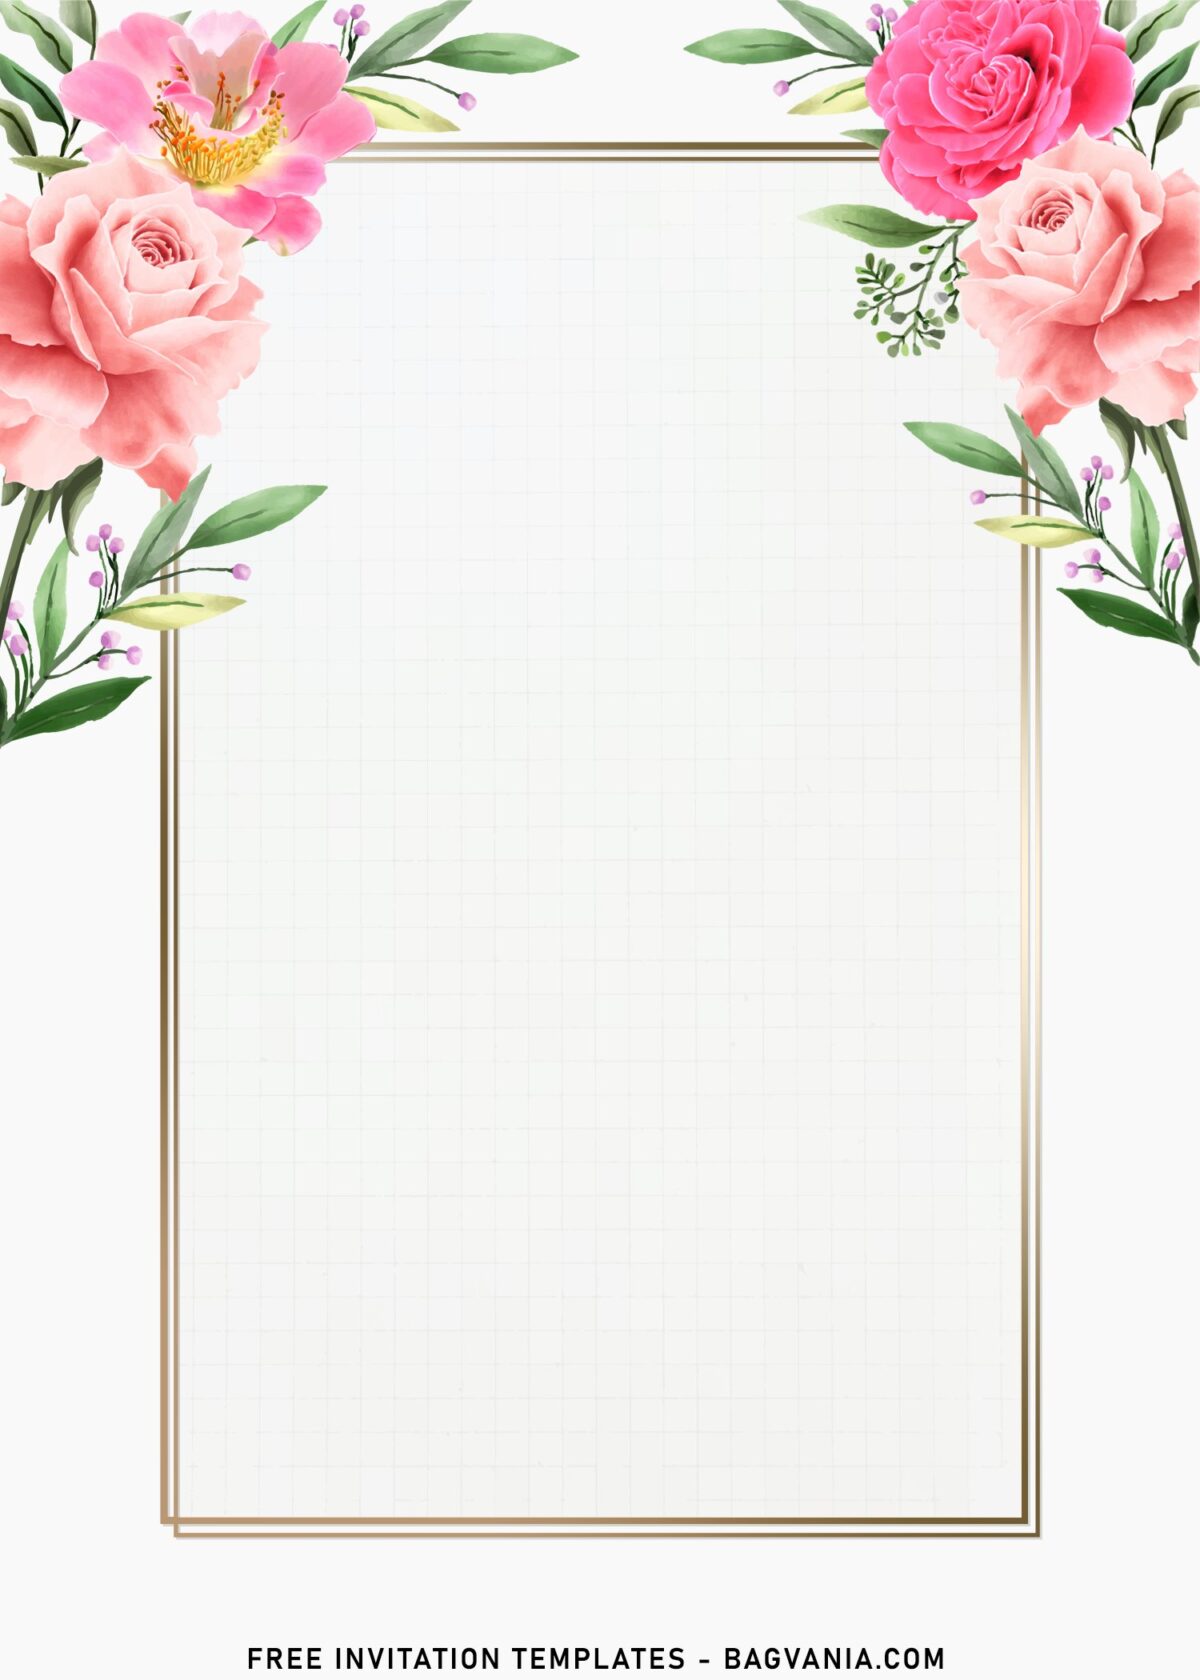 7+ Simple Romantic Blush Watercolor Floral Invitation Templates with rose gold frame